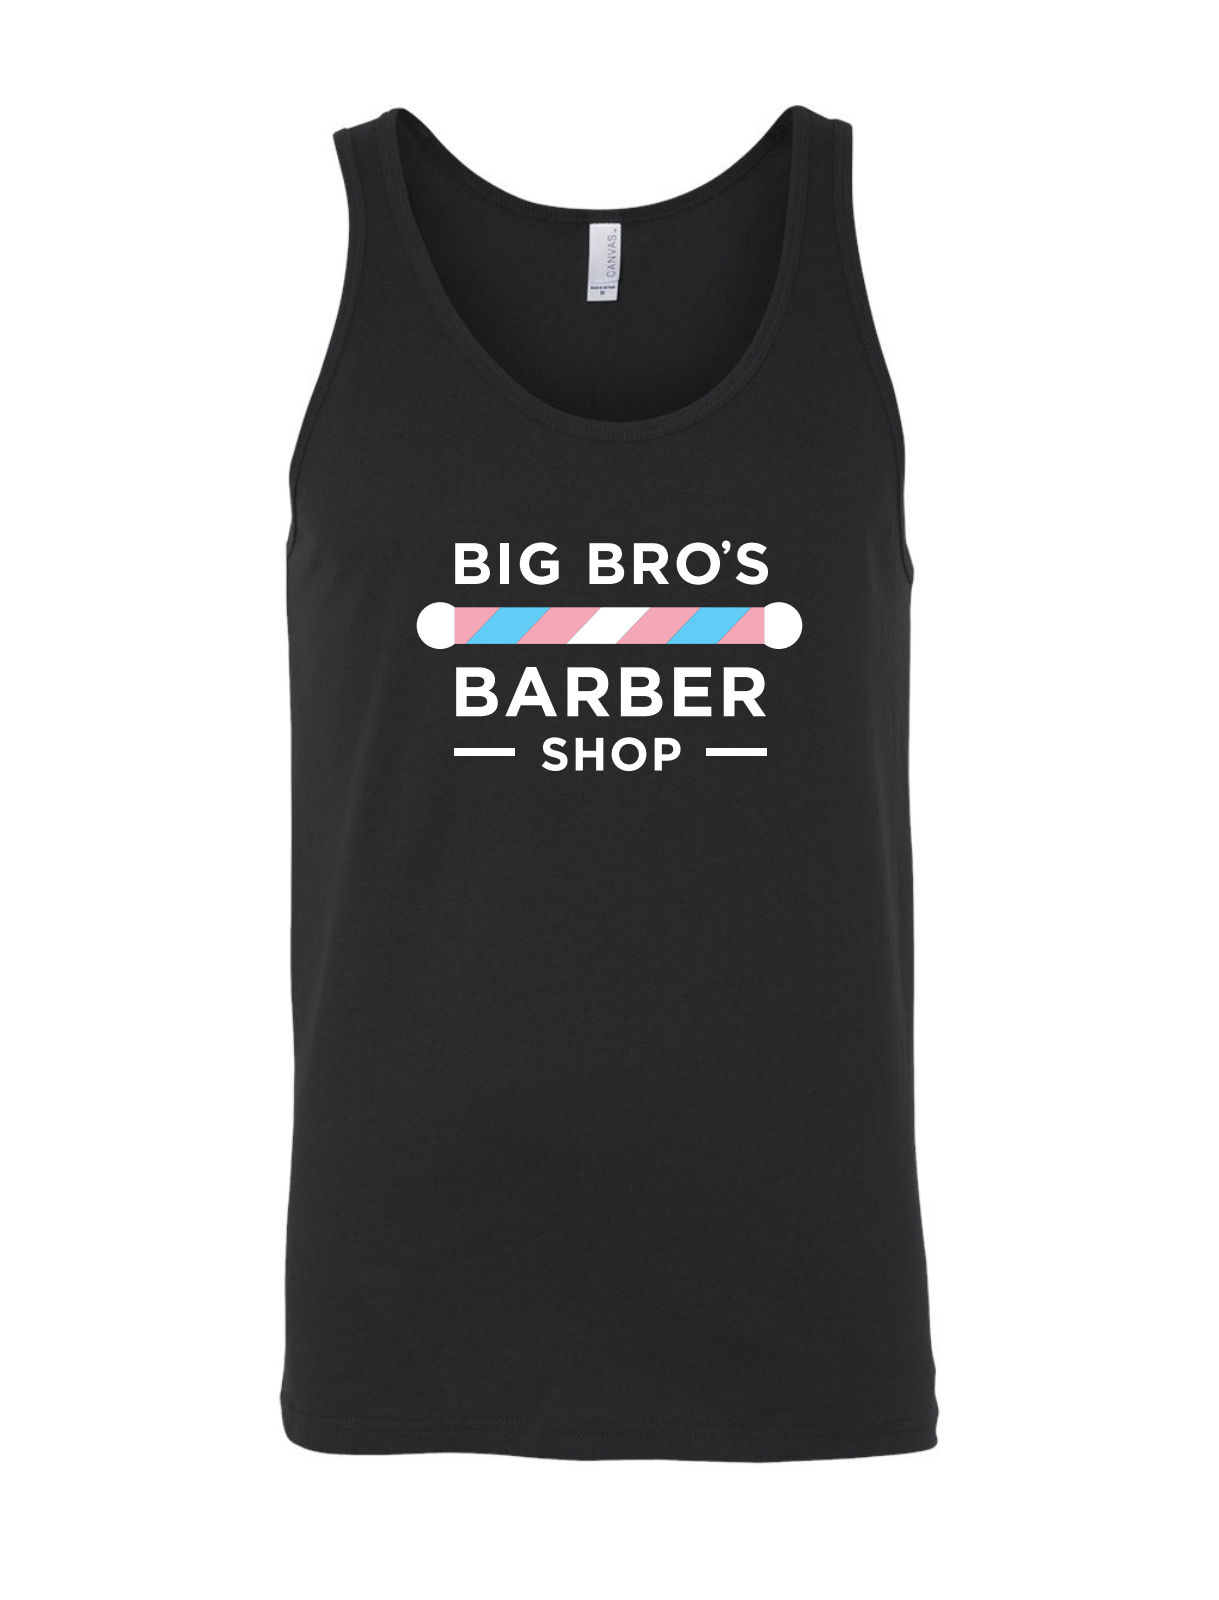 Black tank top with the Big Bro's Barbershop logo over the chest.